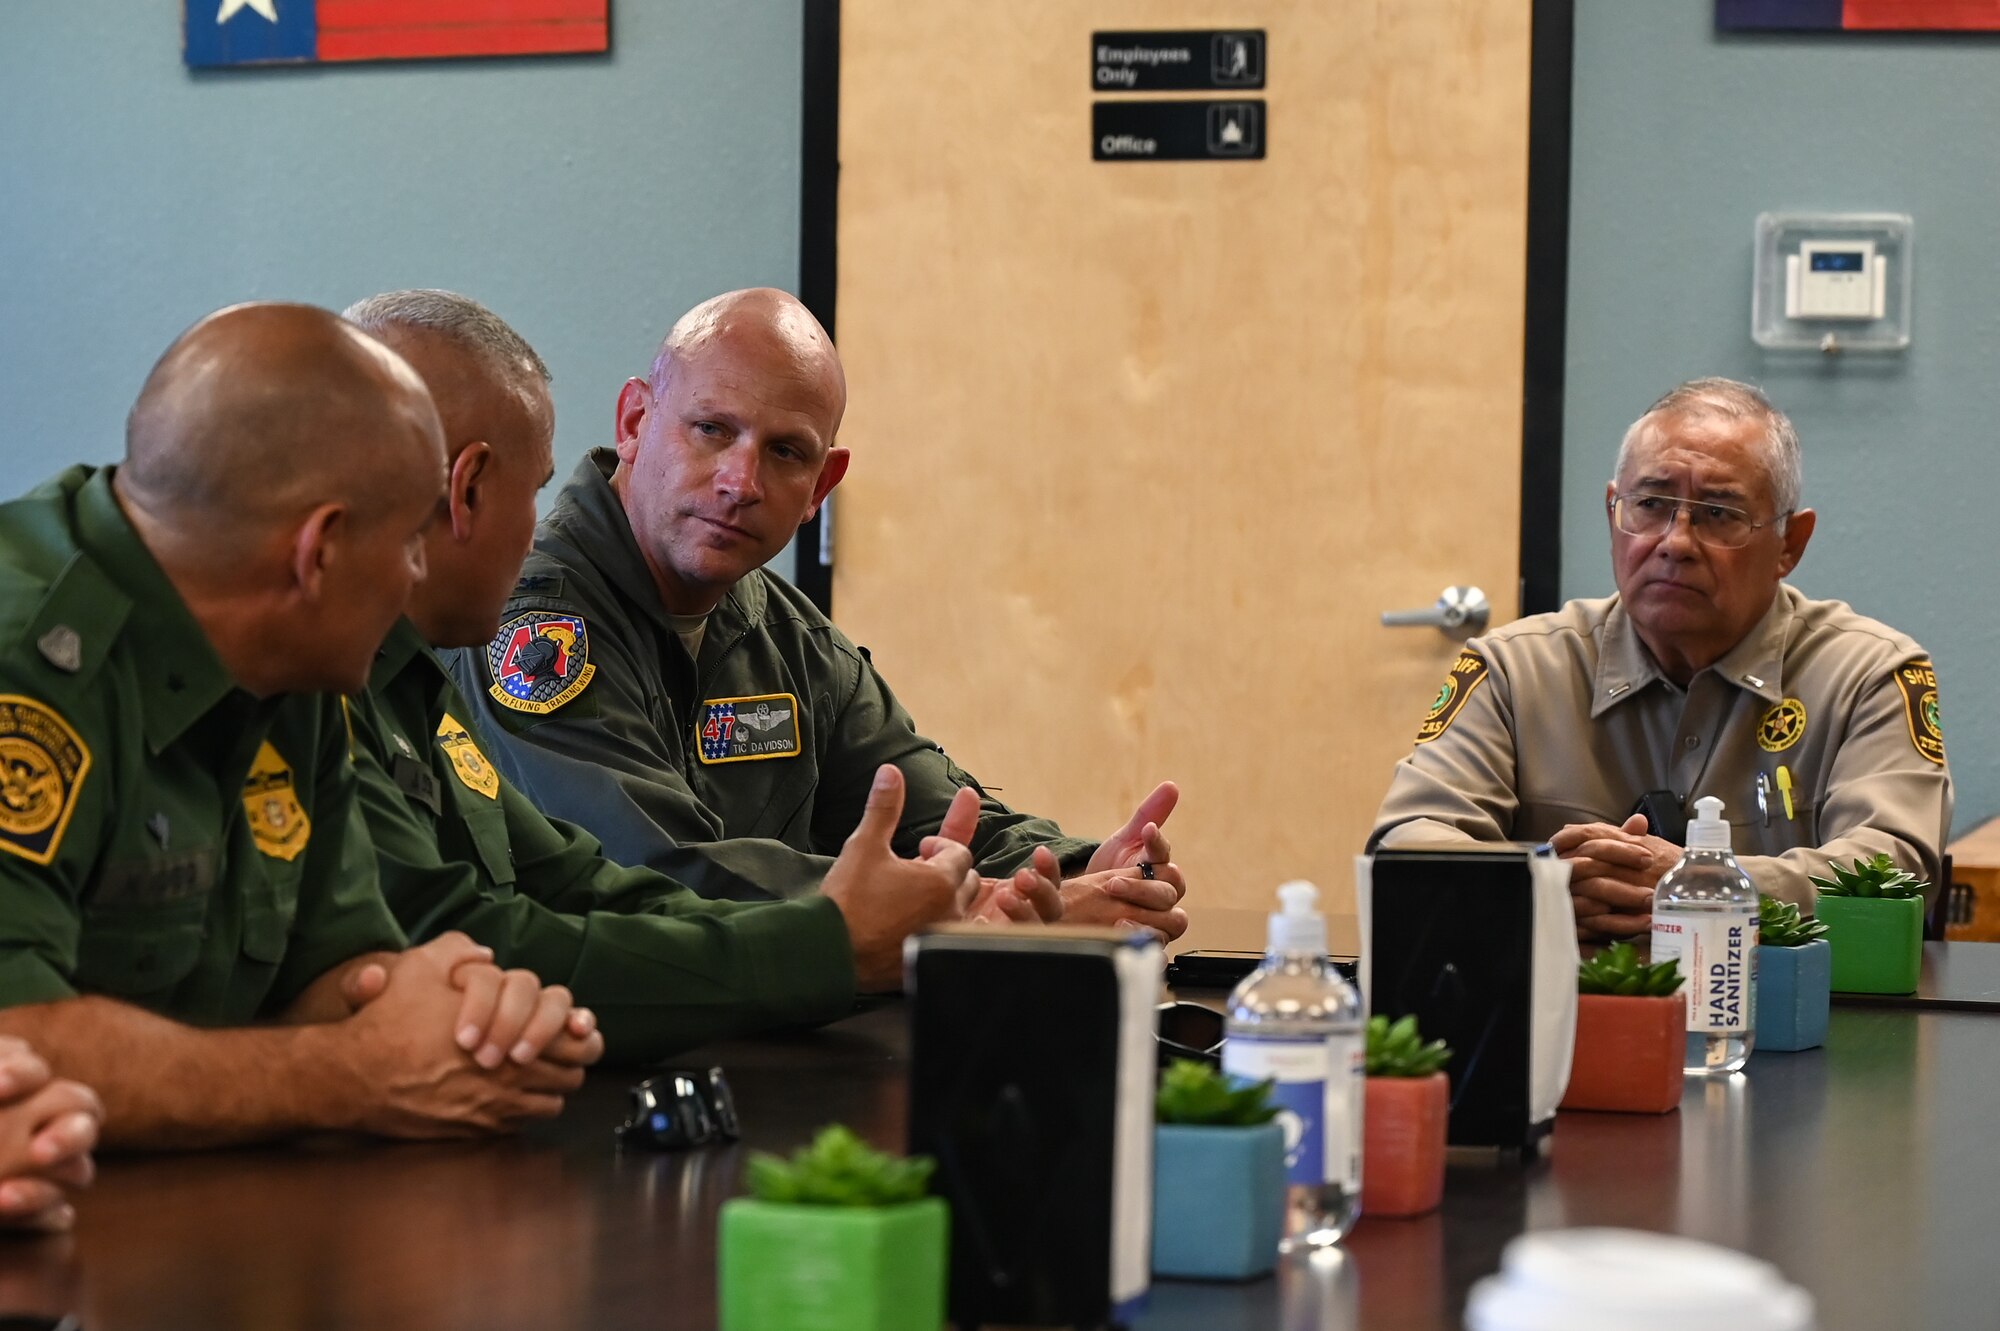 U.S. Air Force Col. Kevin Davidson, 47th Flying Training Wing commander, listens to Acting Chief Patrol Agent Juan Bernal, U.S. Border Patrol, Del Rio Sector, during a base tour with the U.S. Border Patrol, Del Rio Sector leadership and the Val Verde County Sheriff's Department at Laughlin Air Force Base, Texas, Aug. 4, 2023. The main objective of the visit was to strengthen community partnerships to support future cooperation, community safety, and training opportunities. (U.S. Air Force photo by Airman 1st Class Keira Rossman)